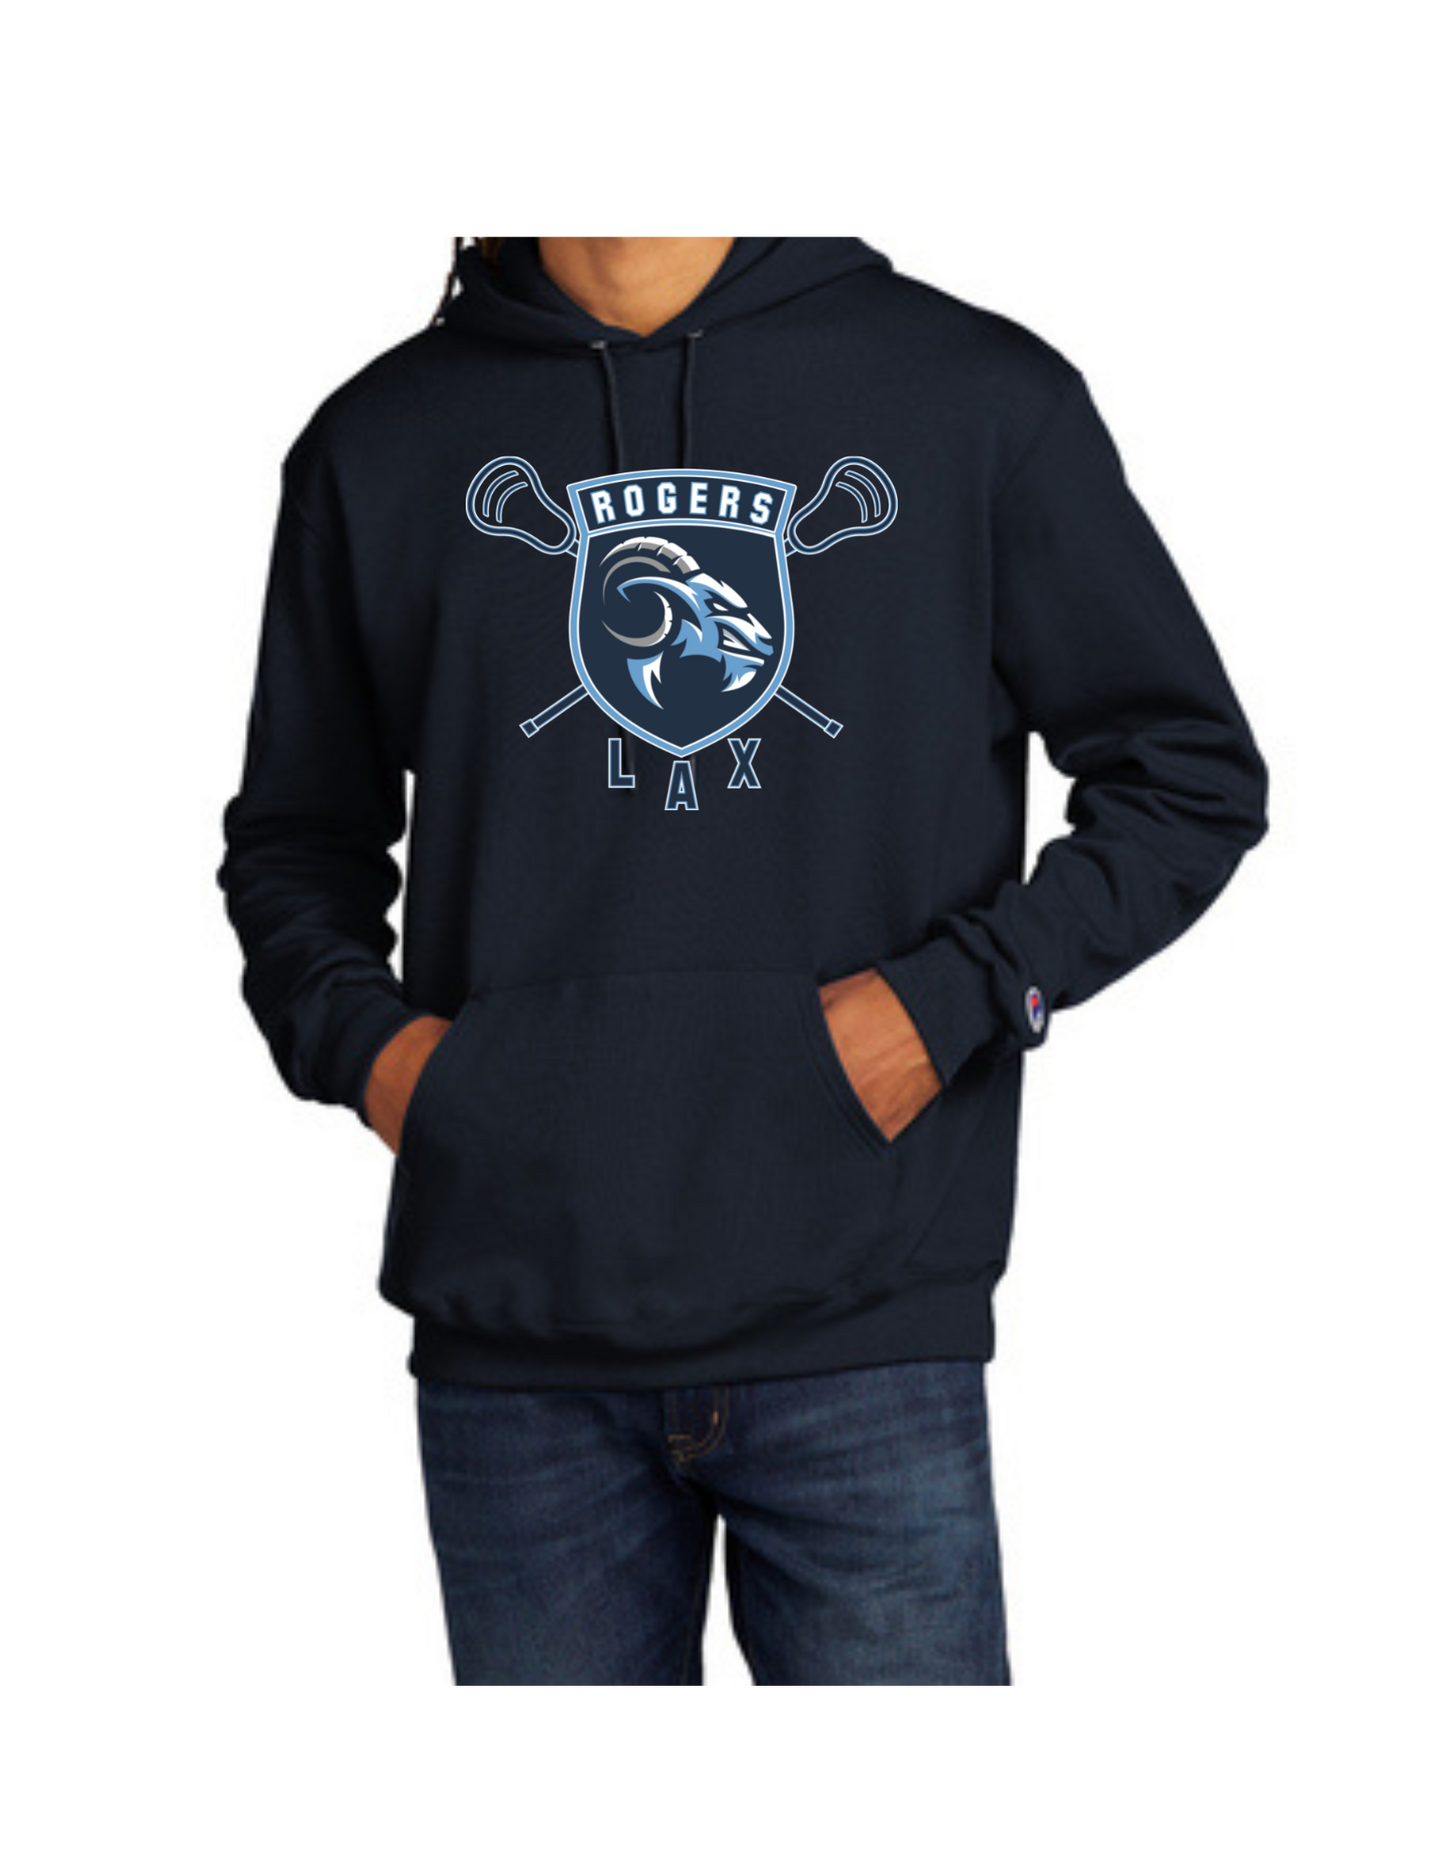 Rogers Lacrosse Shield Champion Hooded Sweatshirt (click for additional options)